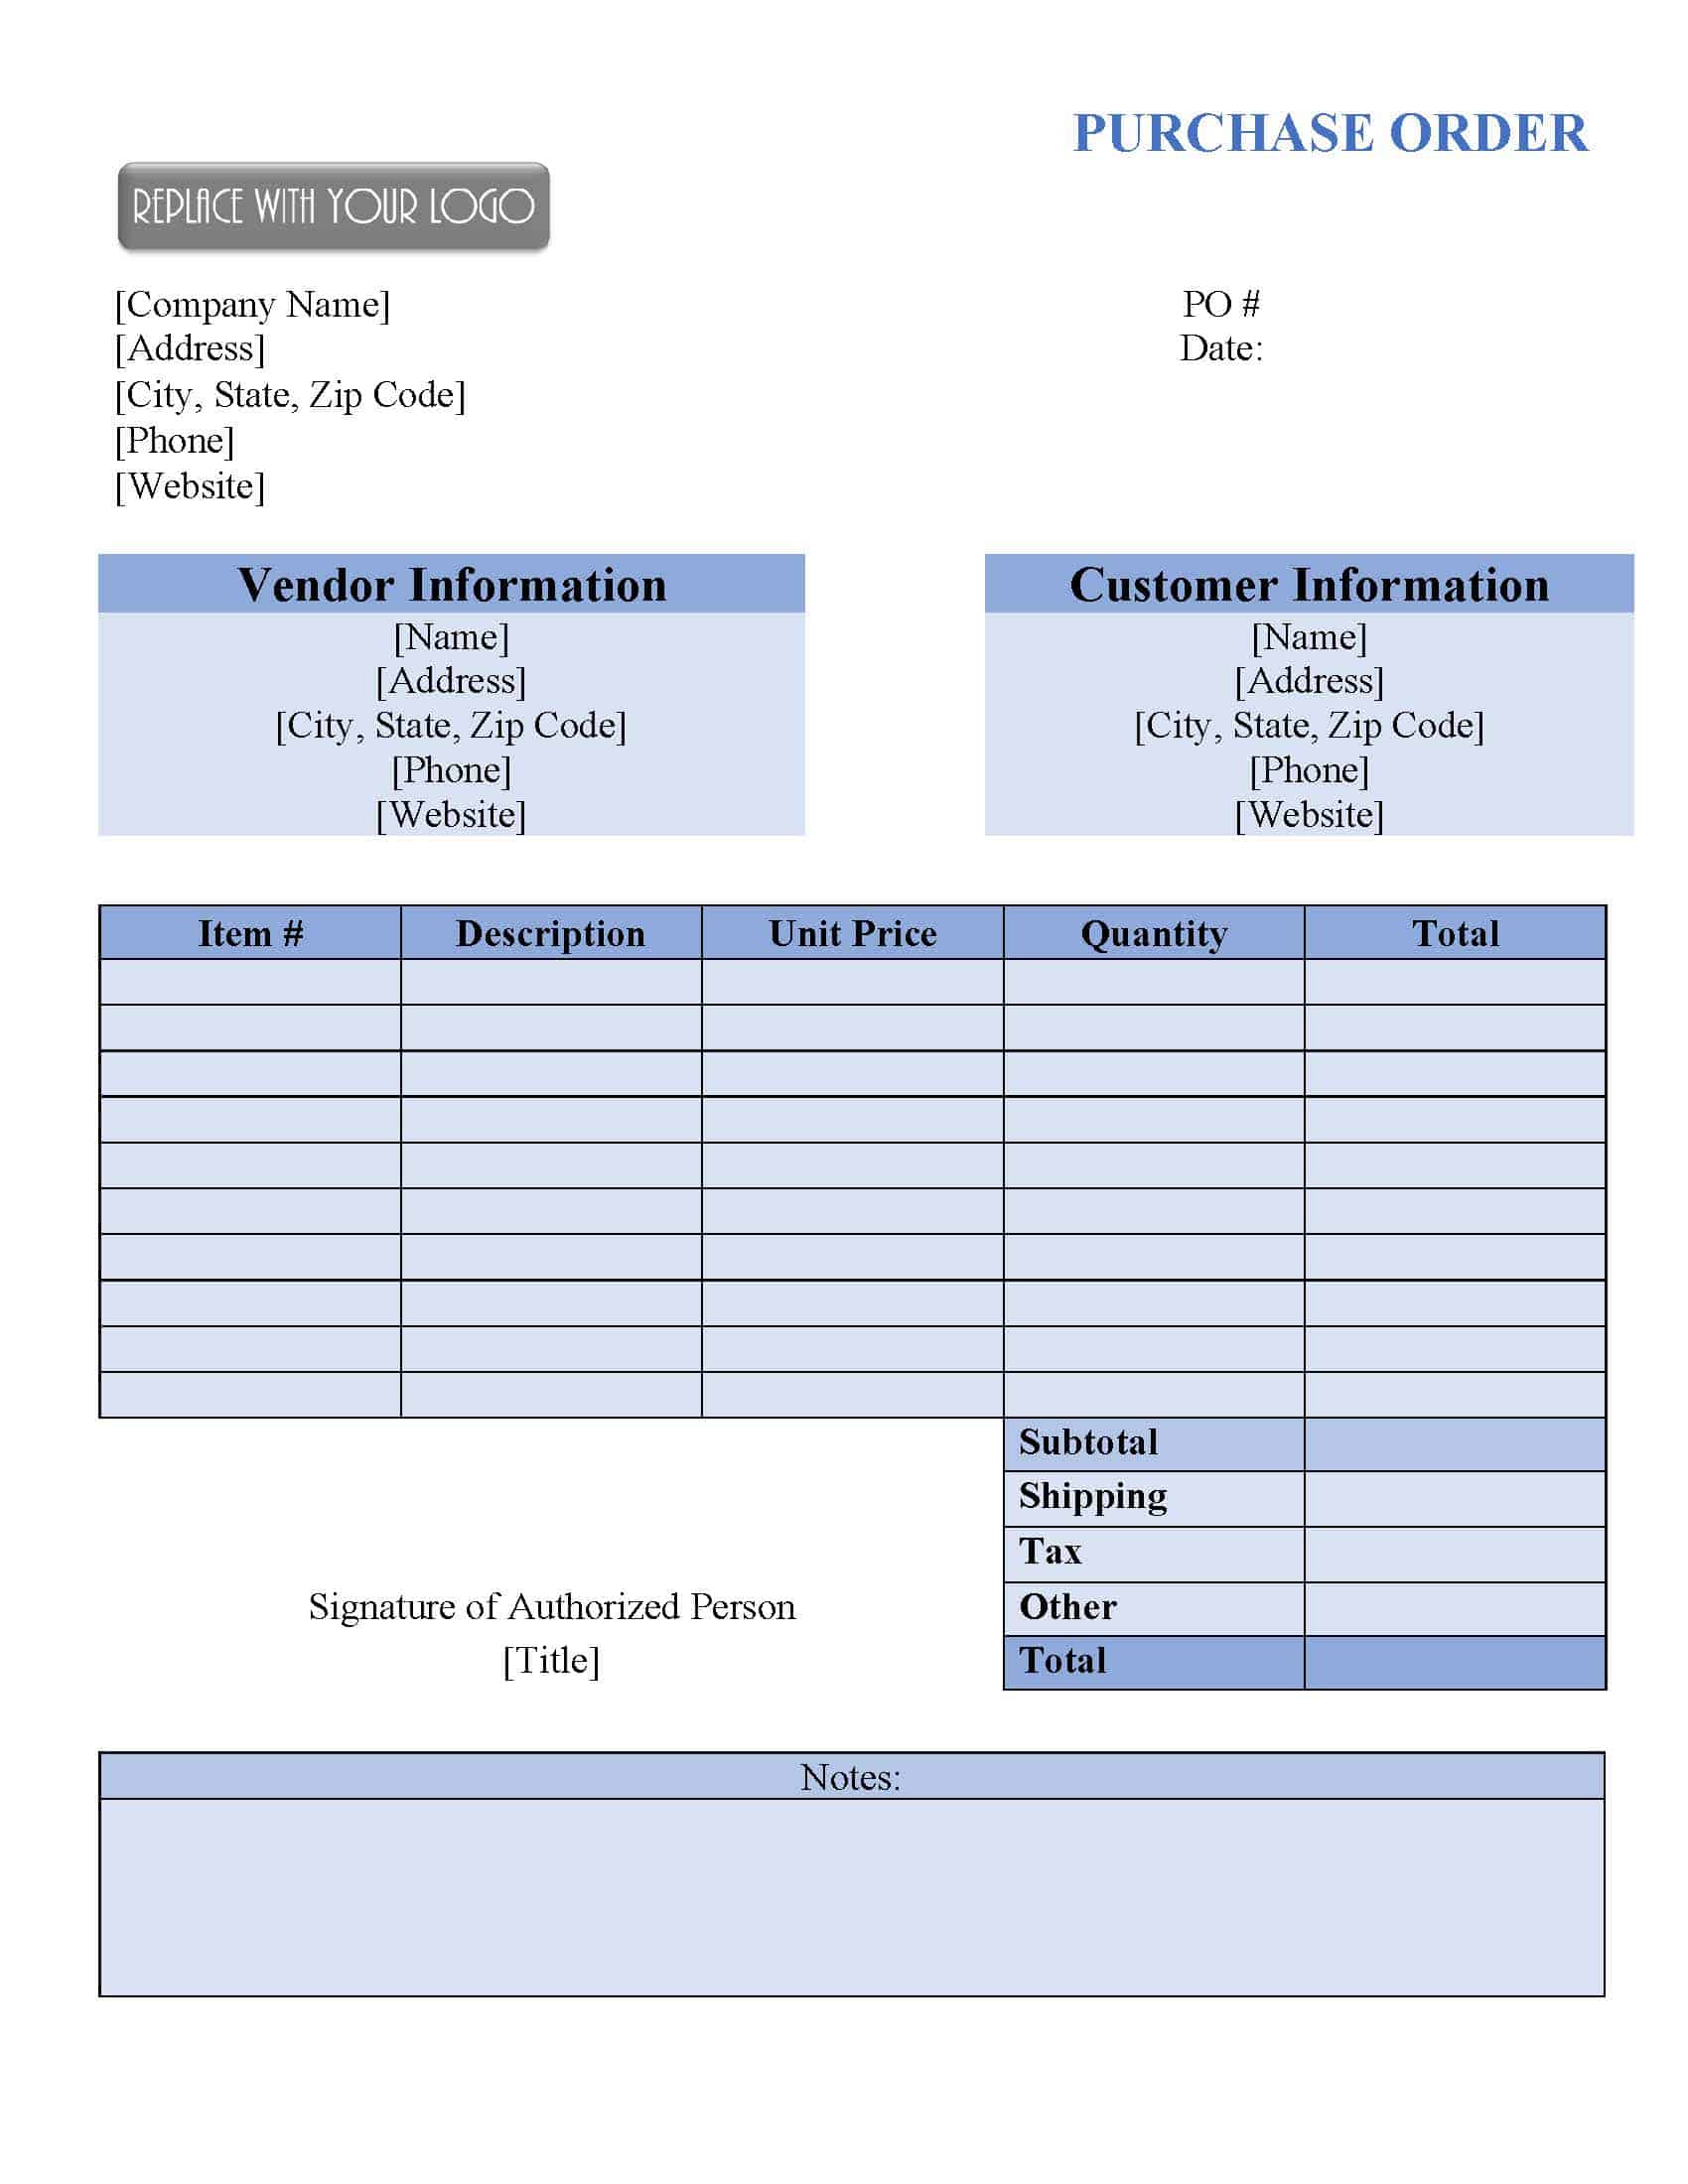 15-sample-purchase-order-forms-purchase-order-form-purchase-order-vrogue